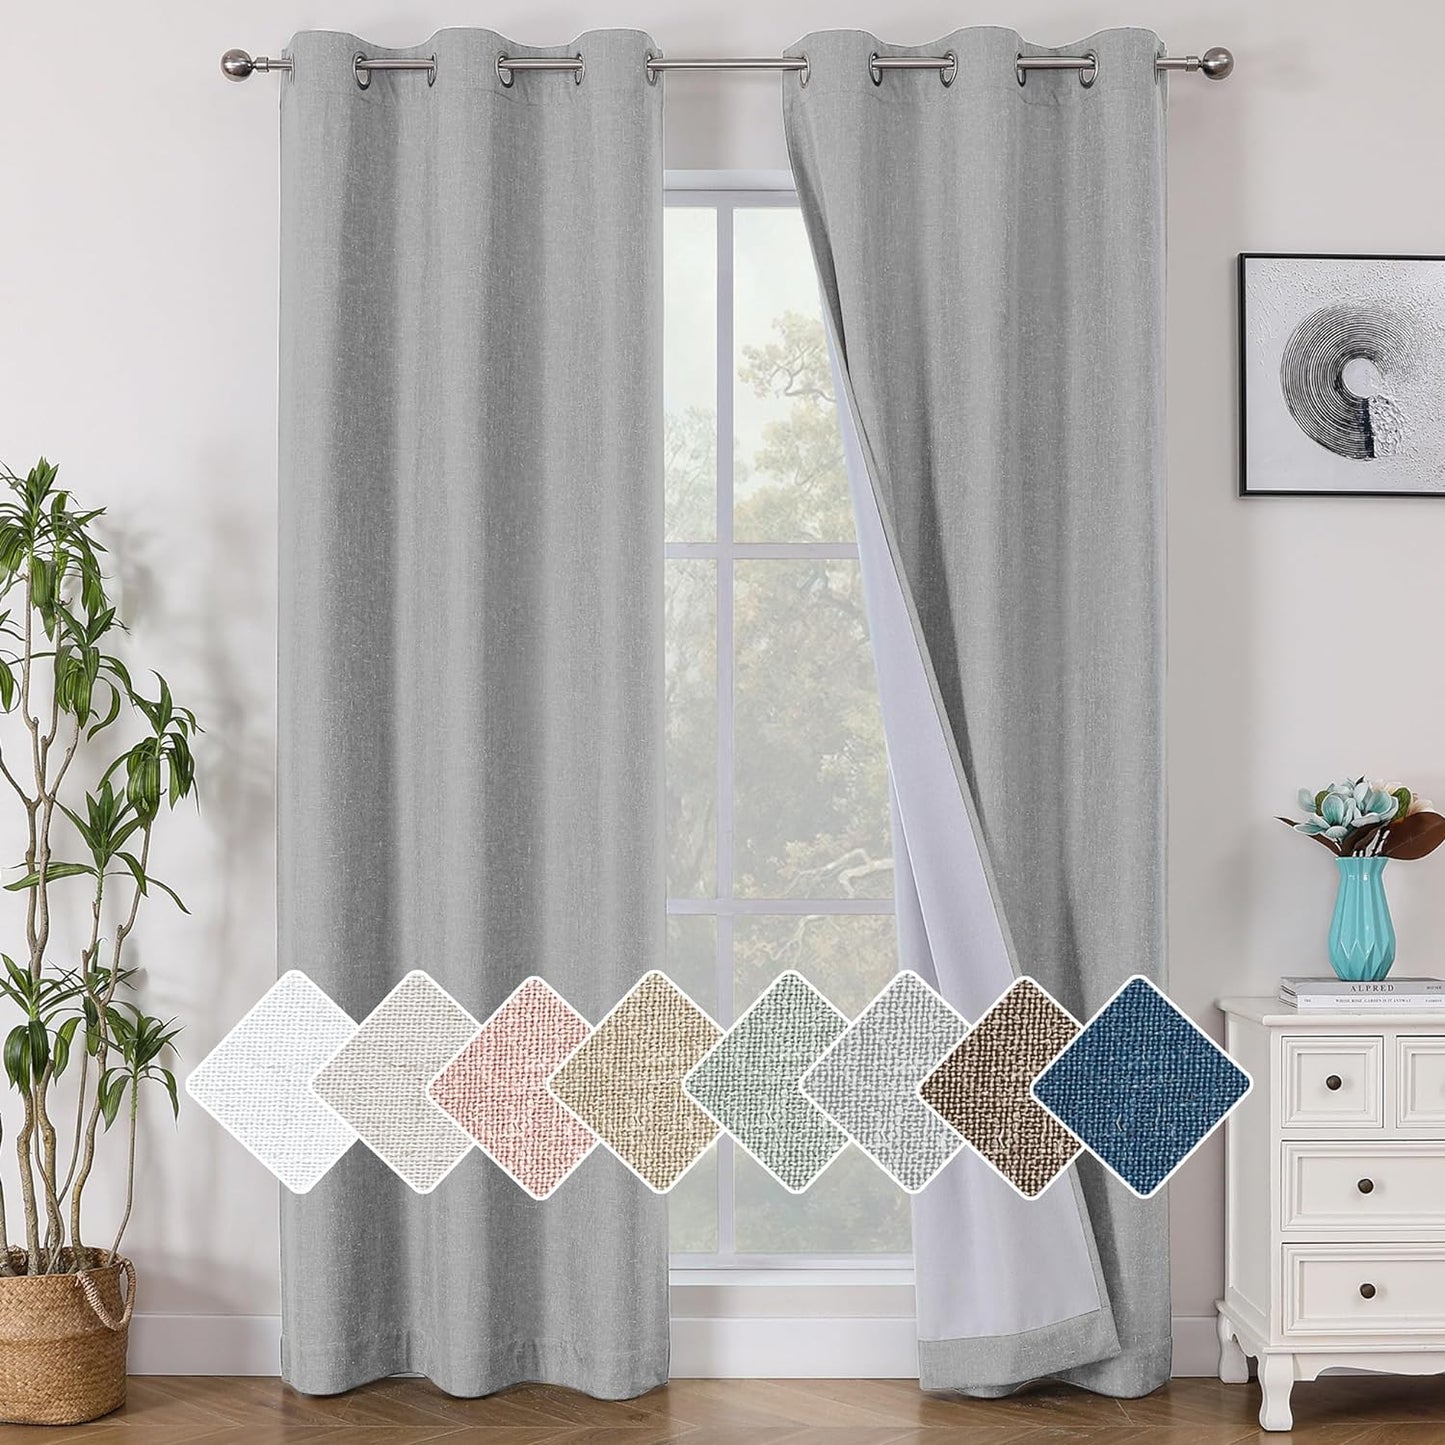 Jenny Ivory Beige Textured Linen 100% Blackout Curtains 63 Inch Length 2 Panels, Energy Saving Window Treatment Heavy Curtain Drapes for Bedroom/Living Room, Burlap Fabric Curtains, 38W  Simplebrand Grey 38"W X 96"L 